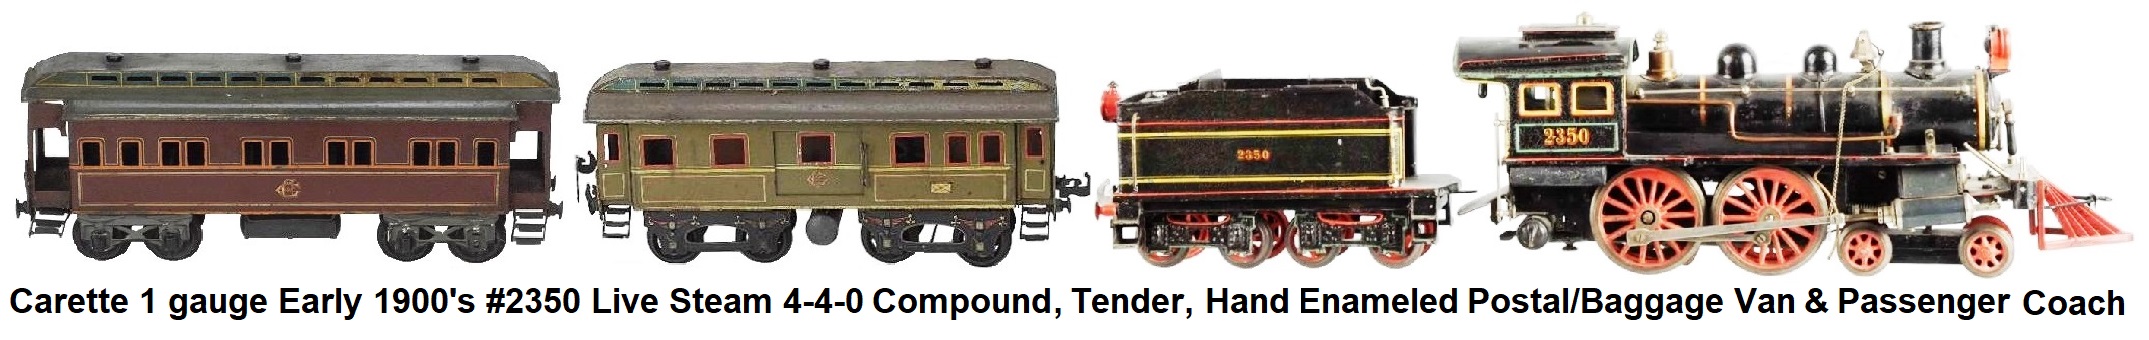 Carette 1 gauge Early 1900's #2350 Live Steam 4-4-0 Compound Loco, tender, Hand Enameled Postal/Luggage van and Passenger Coach